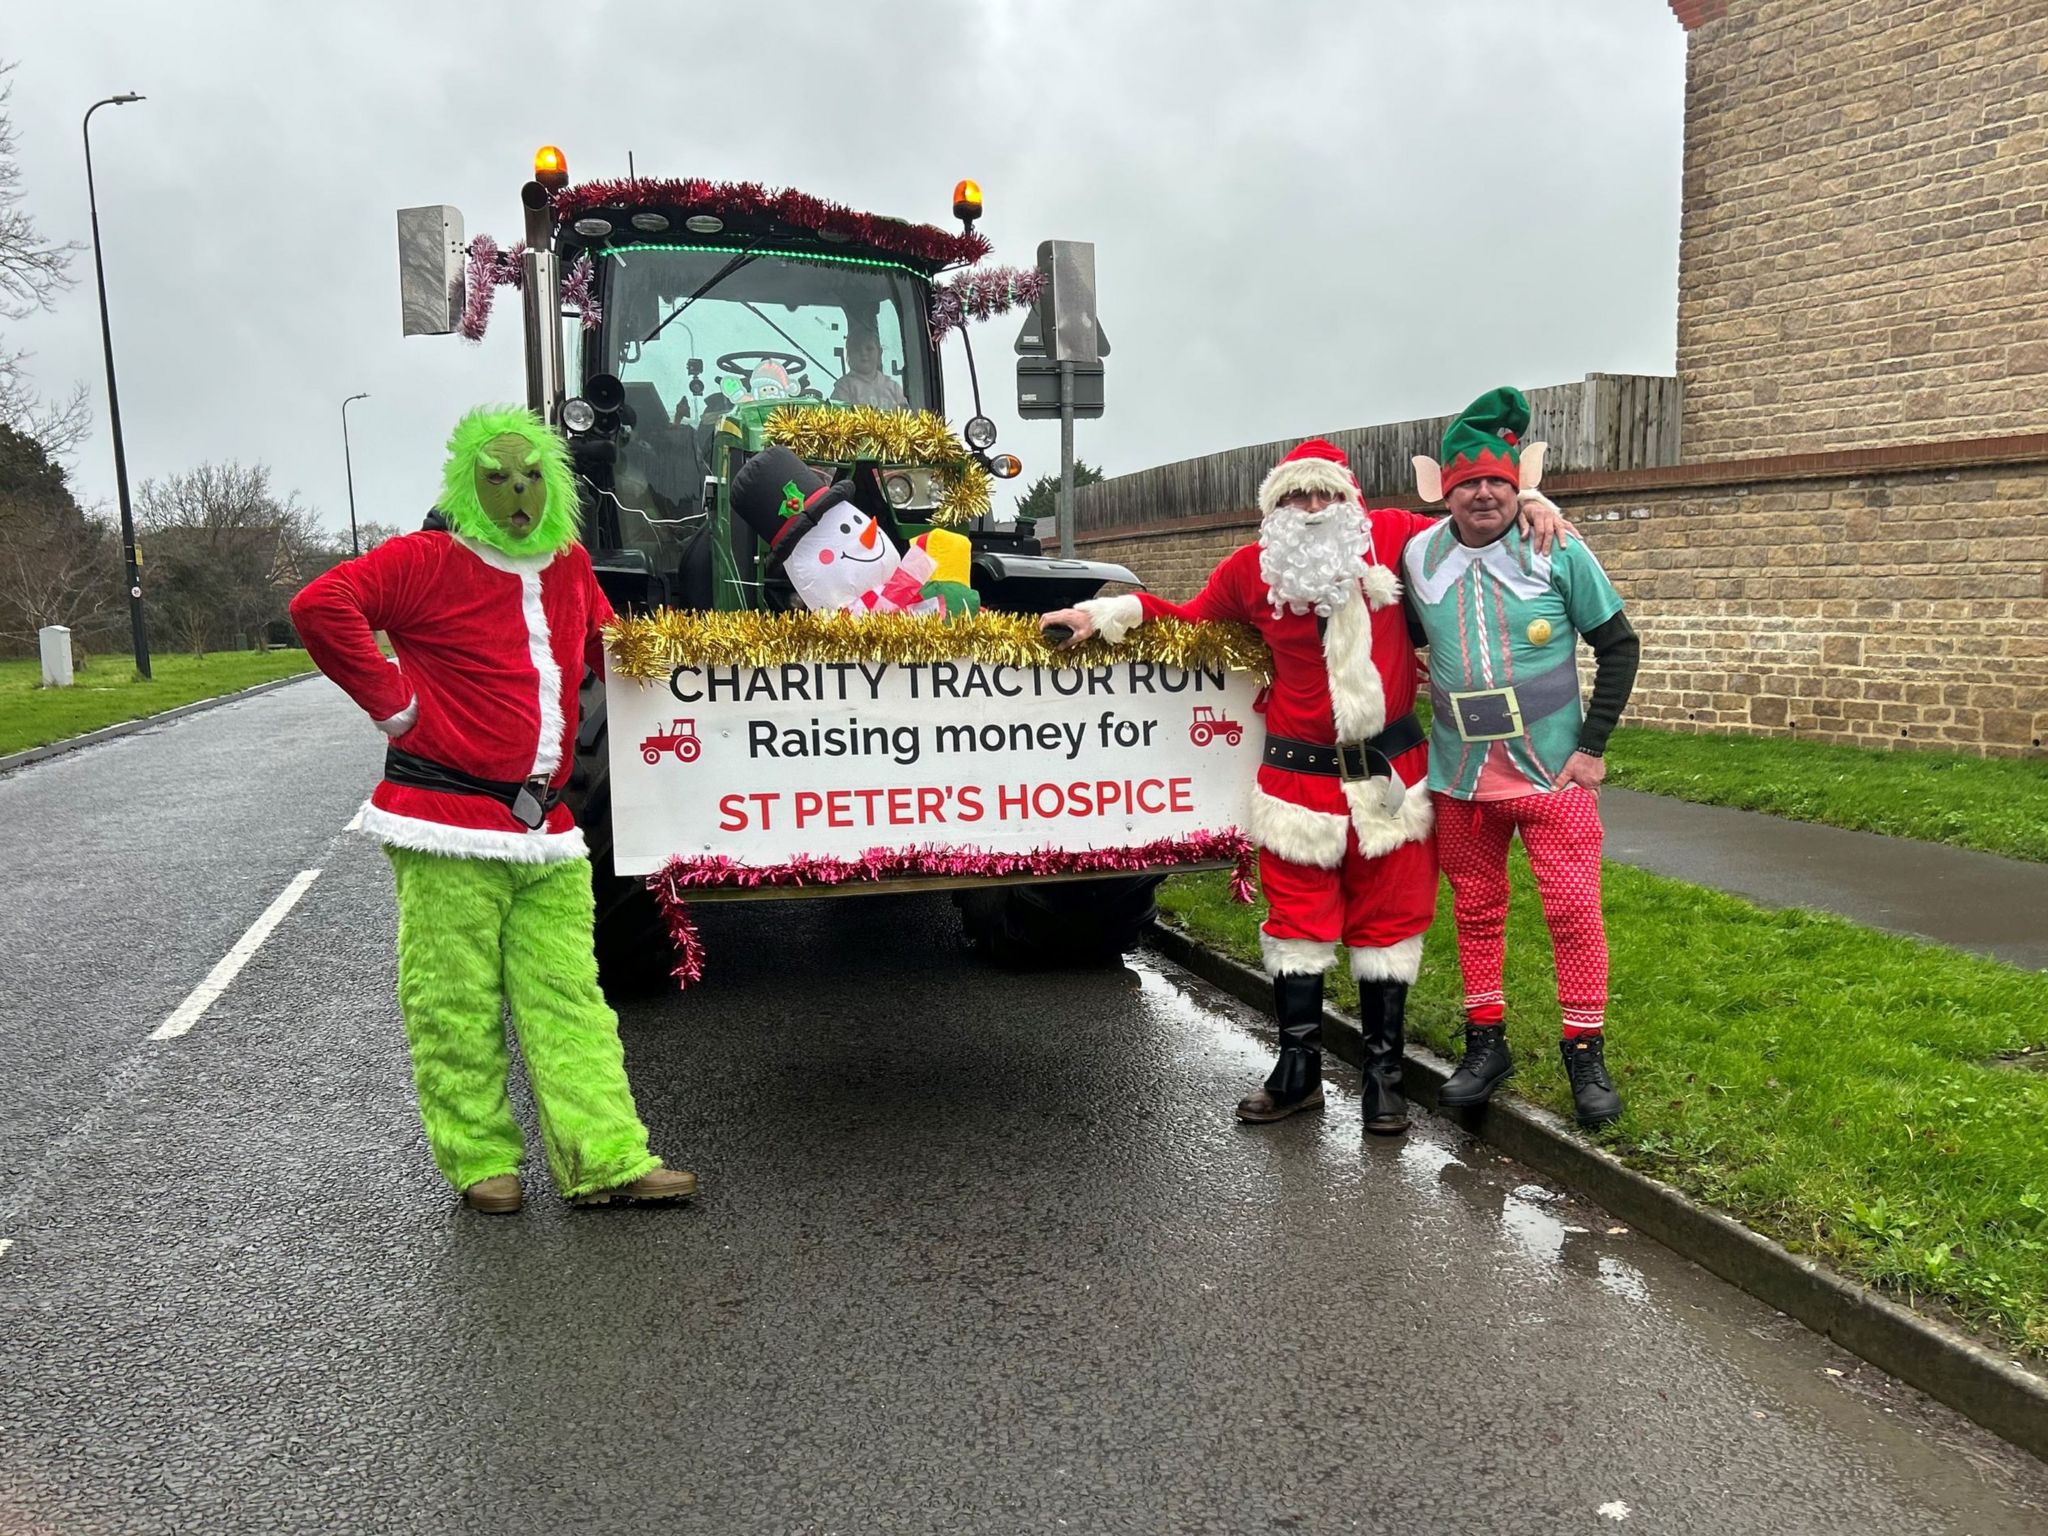 Three men dressed as the Grinch, Father Christmas and an elf are standing near a tractor which says Charity Tractor Run Raising money for St Peter's Hospice